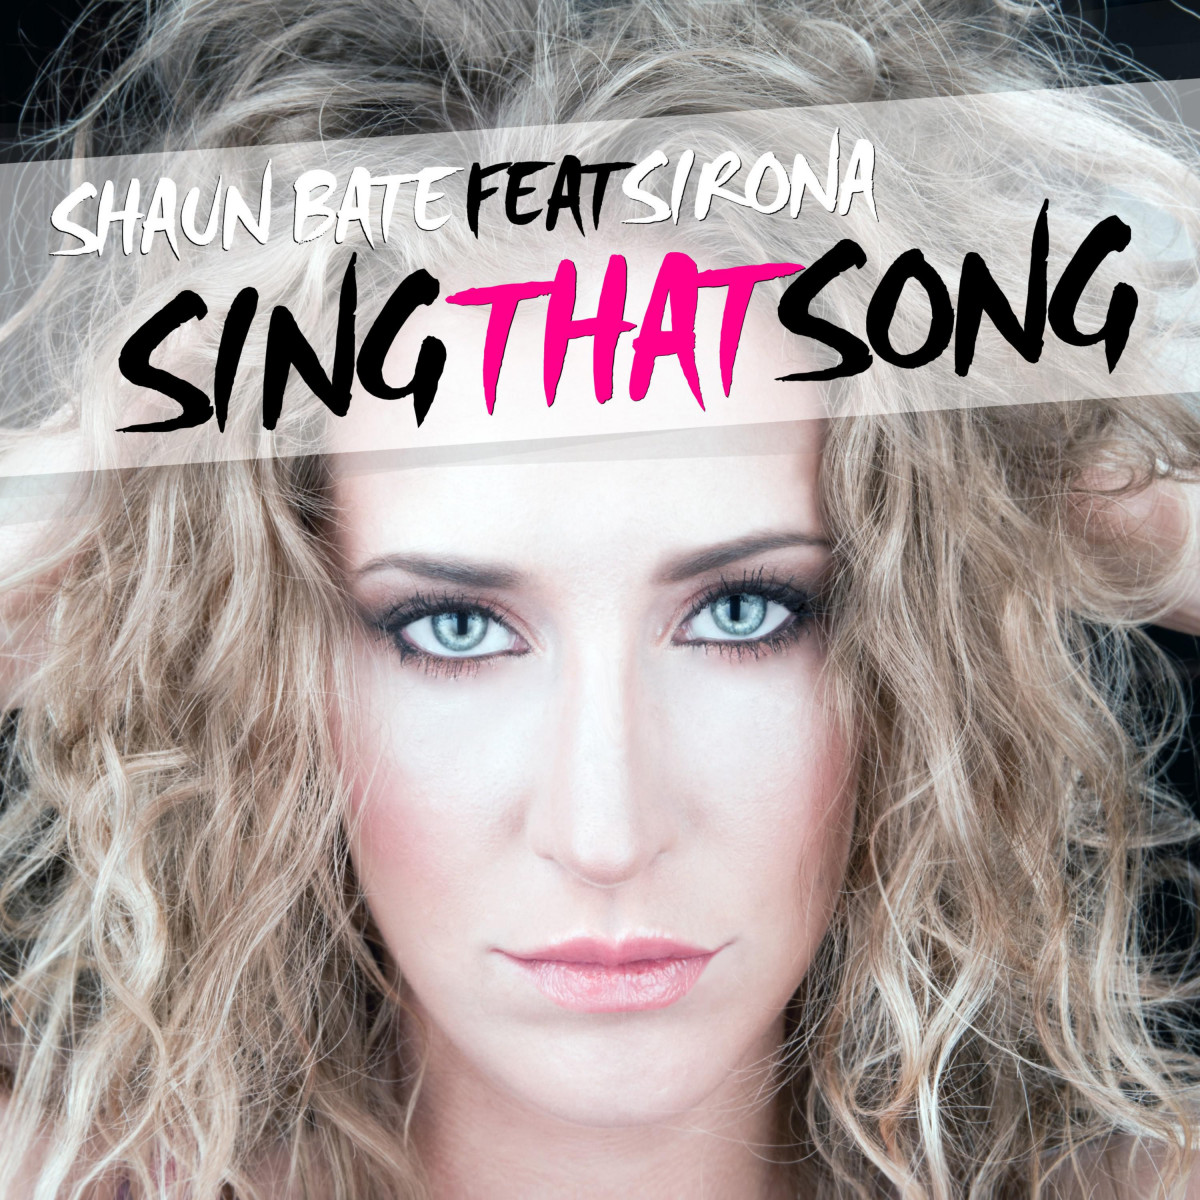 Shaun Bate - Sing That Song (Hands-Up Freaks Remix) (feat. Sirona) (2016)